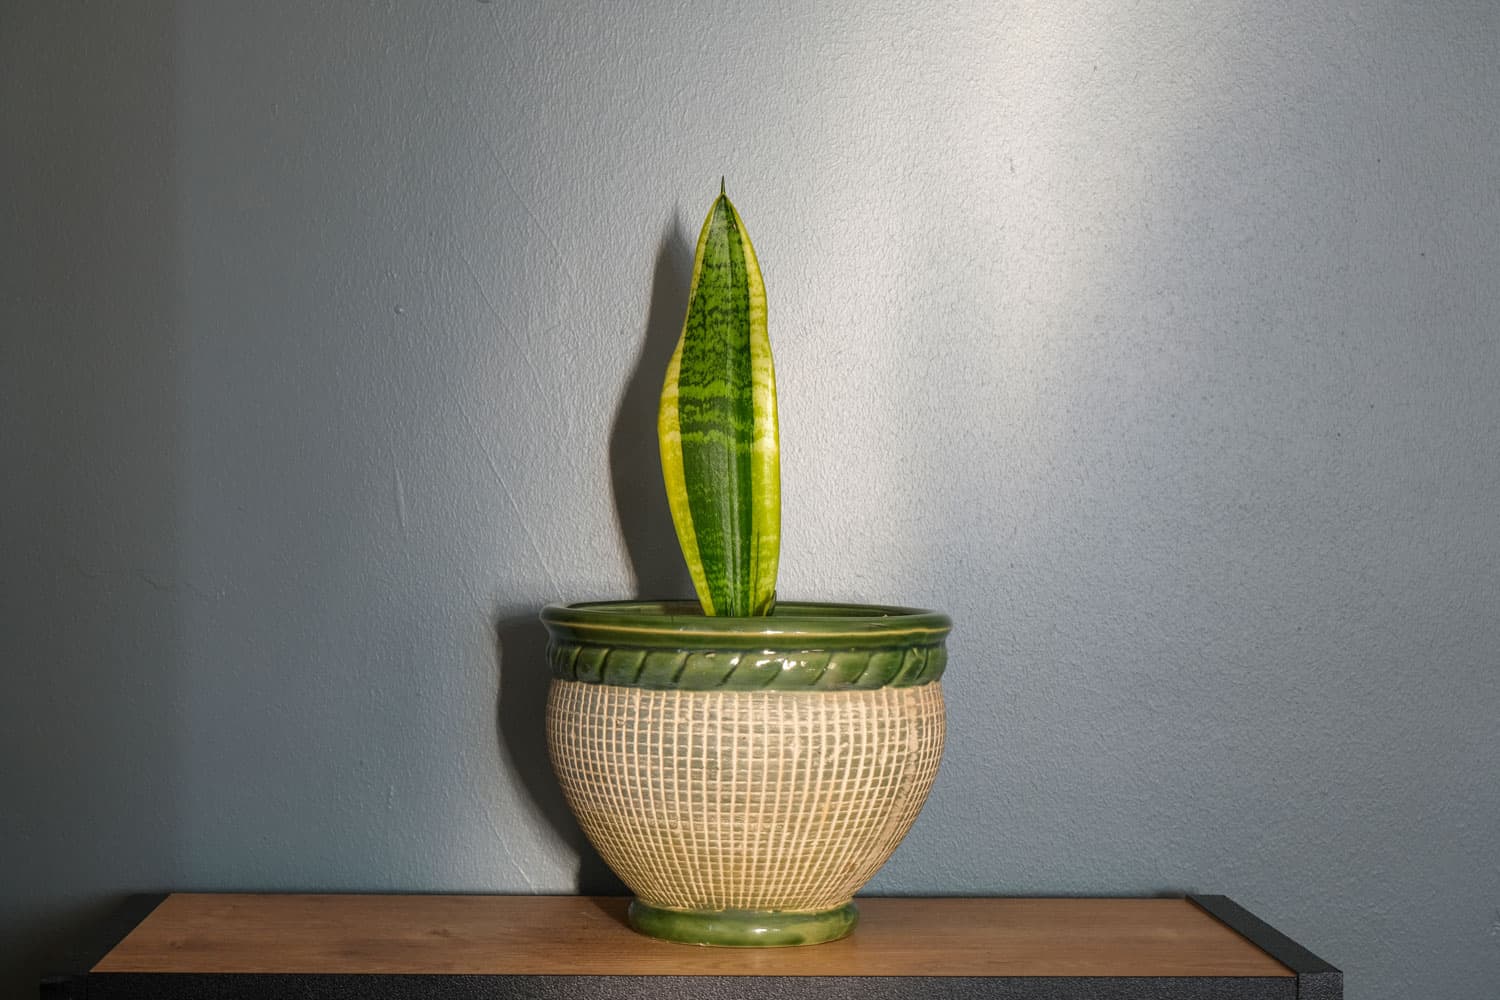 Sansevieria plant in decorative ceramic pot on wooden table in room